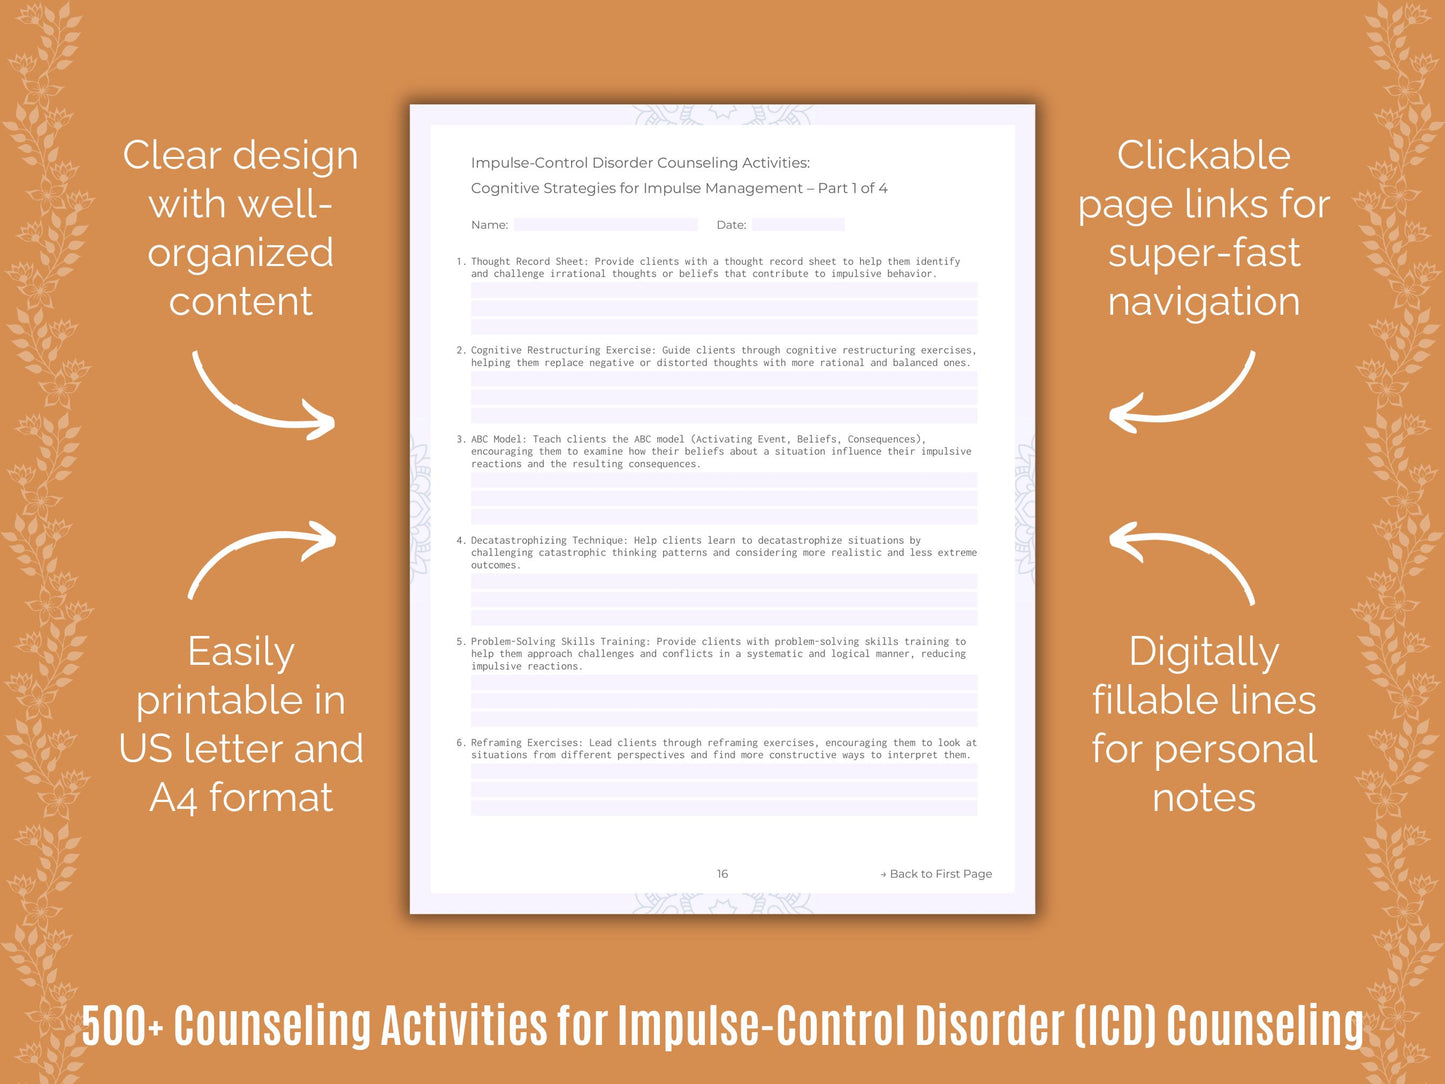 Impulse-Control Disorder (ICD) Counseling Activities Resource